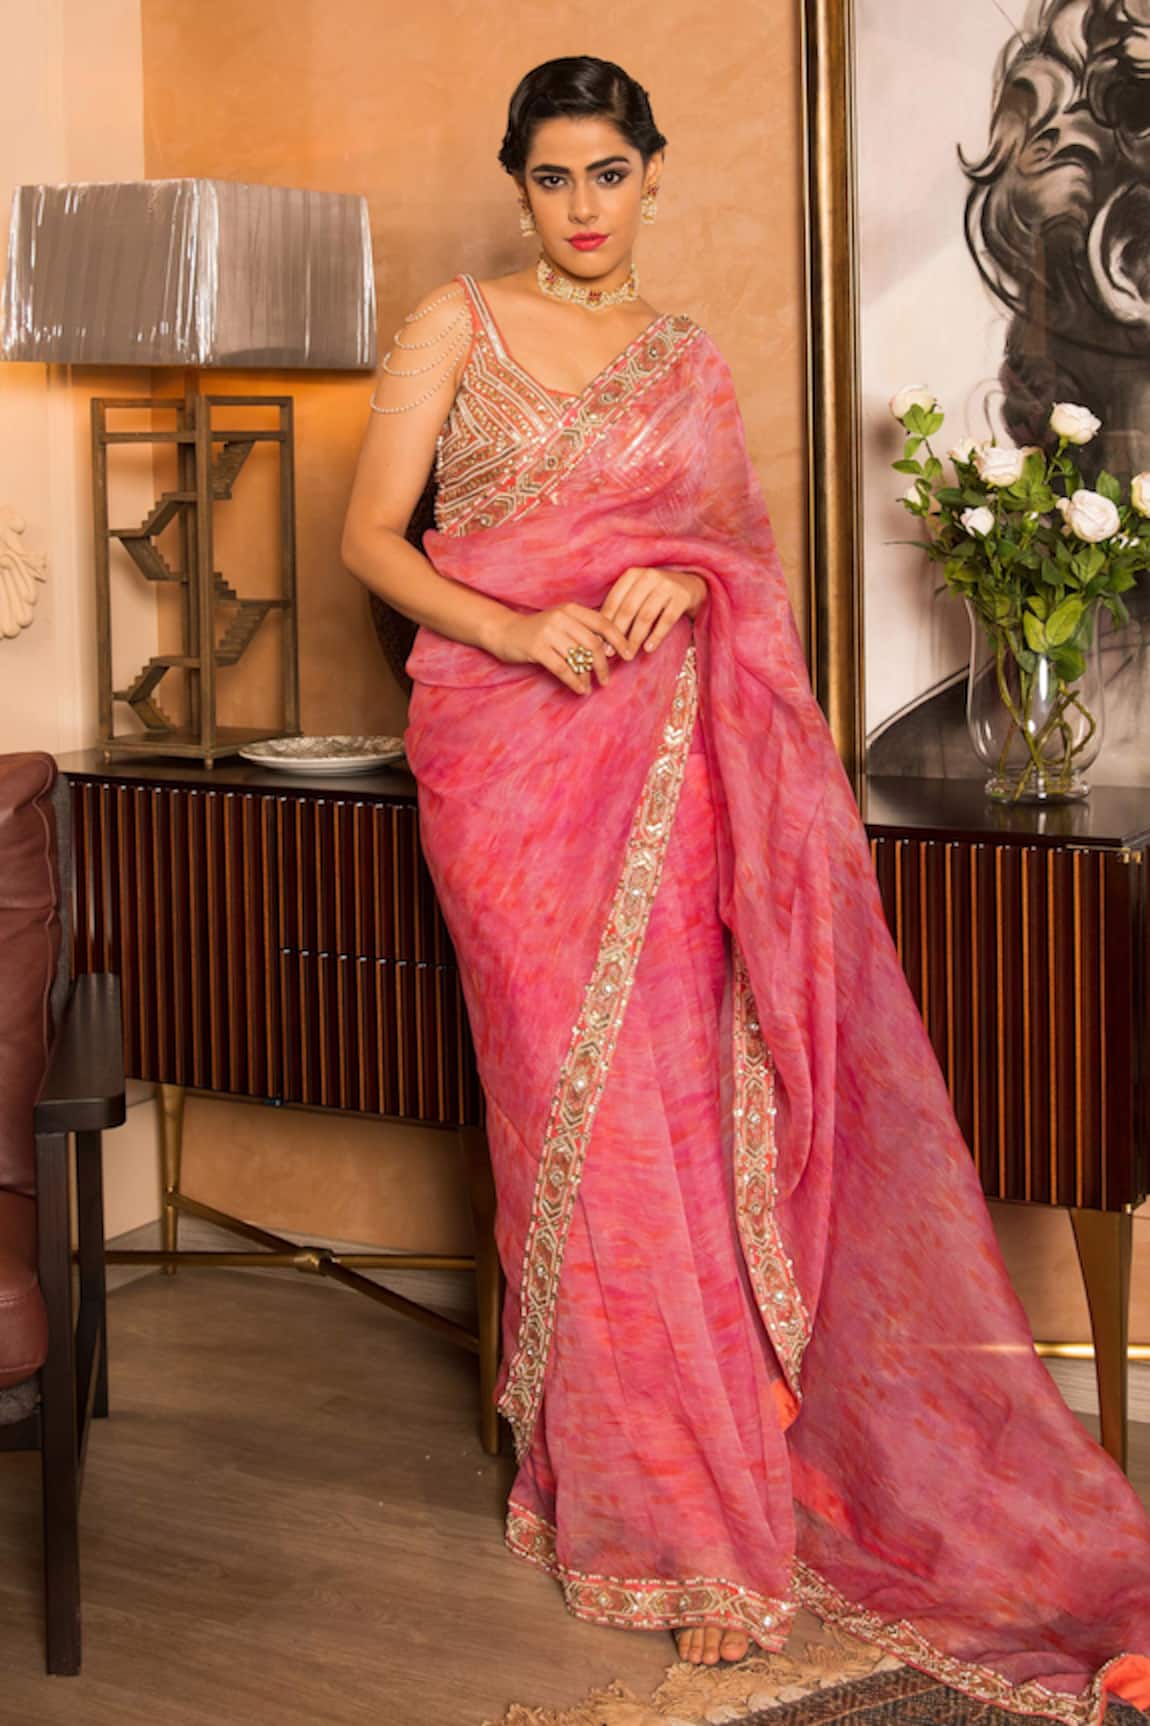 Buy Matsya Pink Meera Wrinkled Tissue Saree With Blouse Online at Aza  Fashions | Saree designs party wear, Stylish sarees, Saree blouse designs  latest